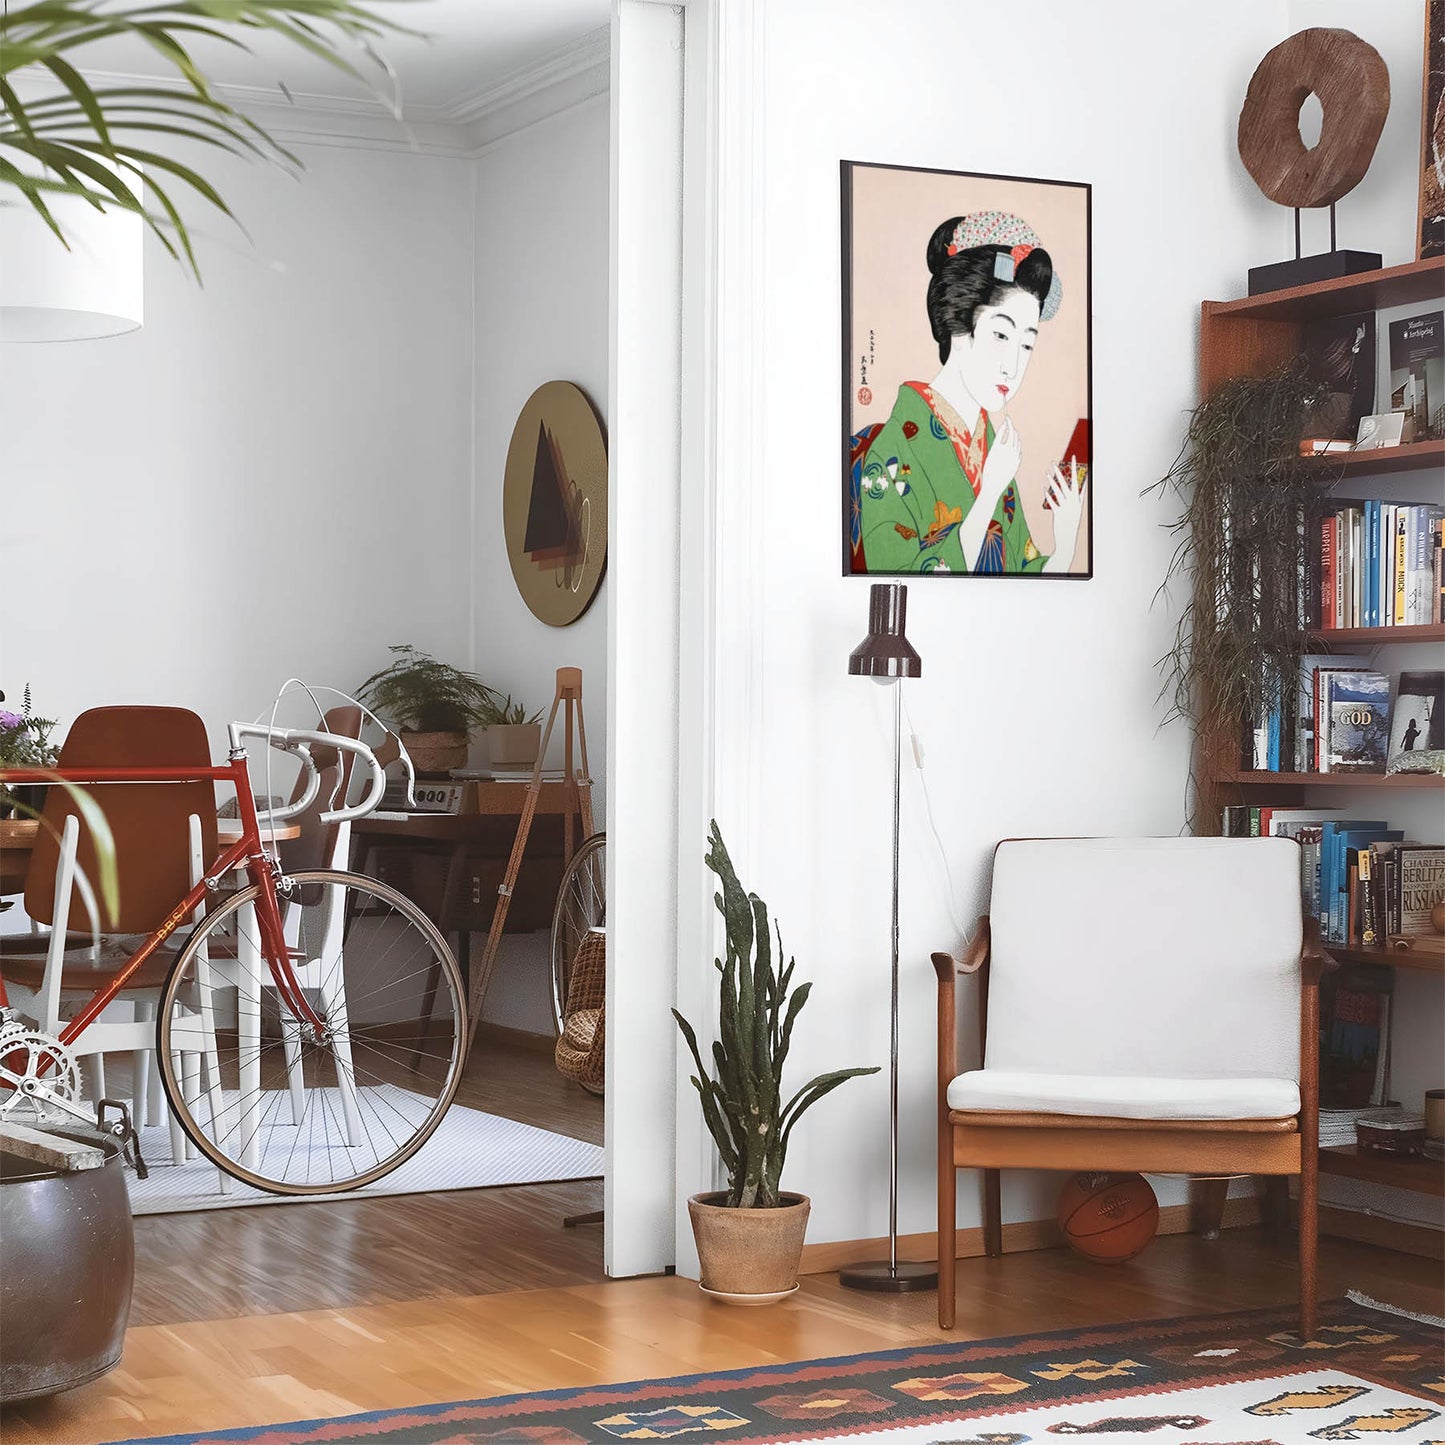 Eclectic living room with a road bike, bookshelf and house plants that features framed artwork of a Geisha Applying Lipstick above a chair and lamp